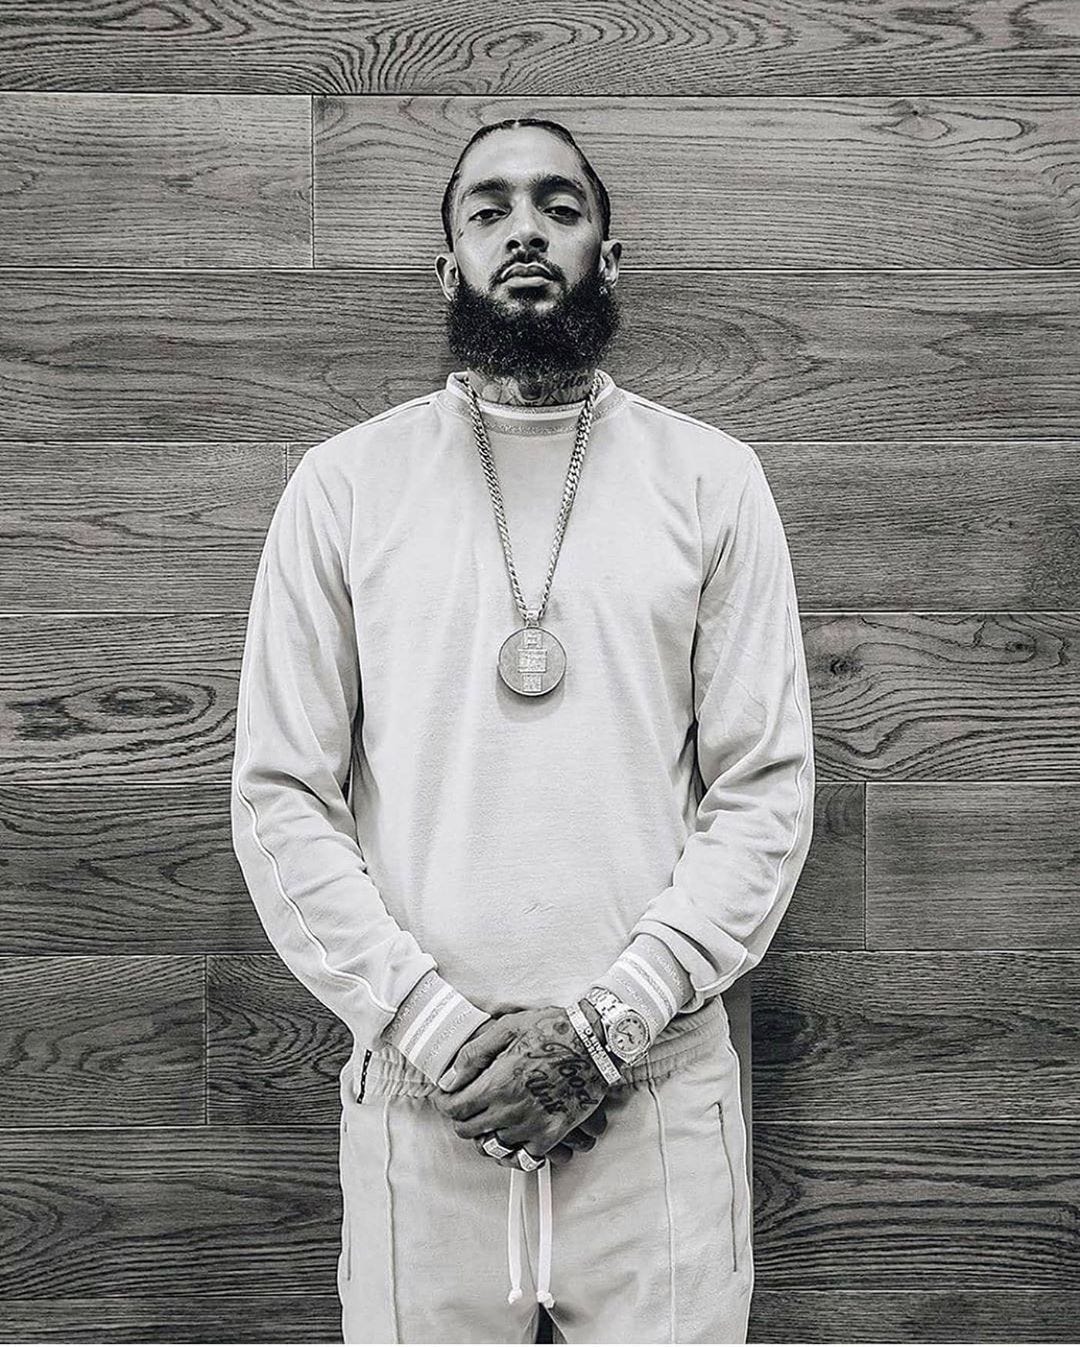 Nipsey Hussle's 10 Steps To Building A Music Empire | Medium